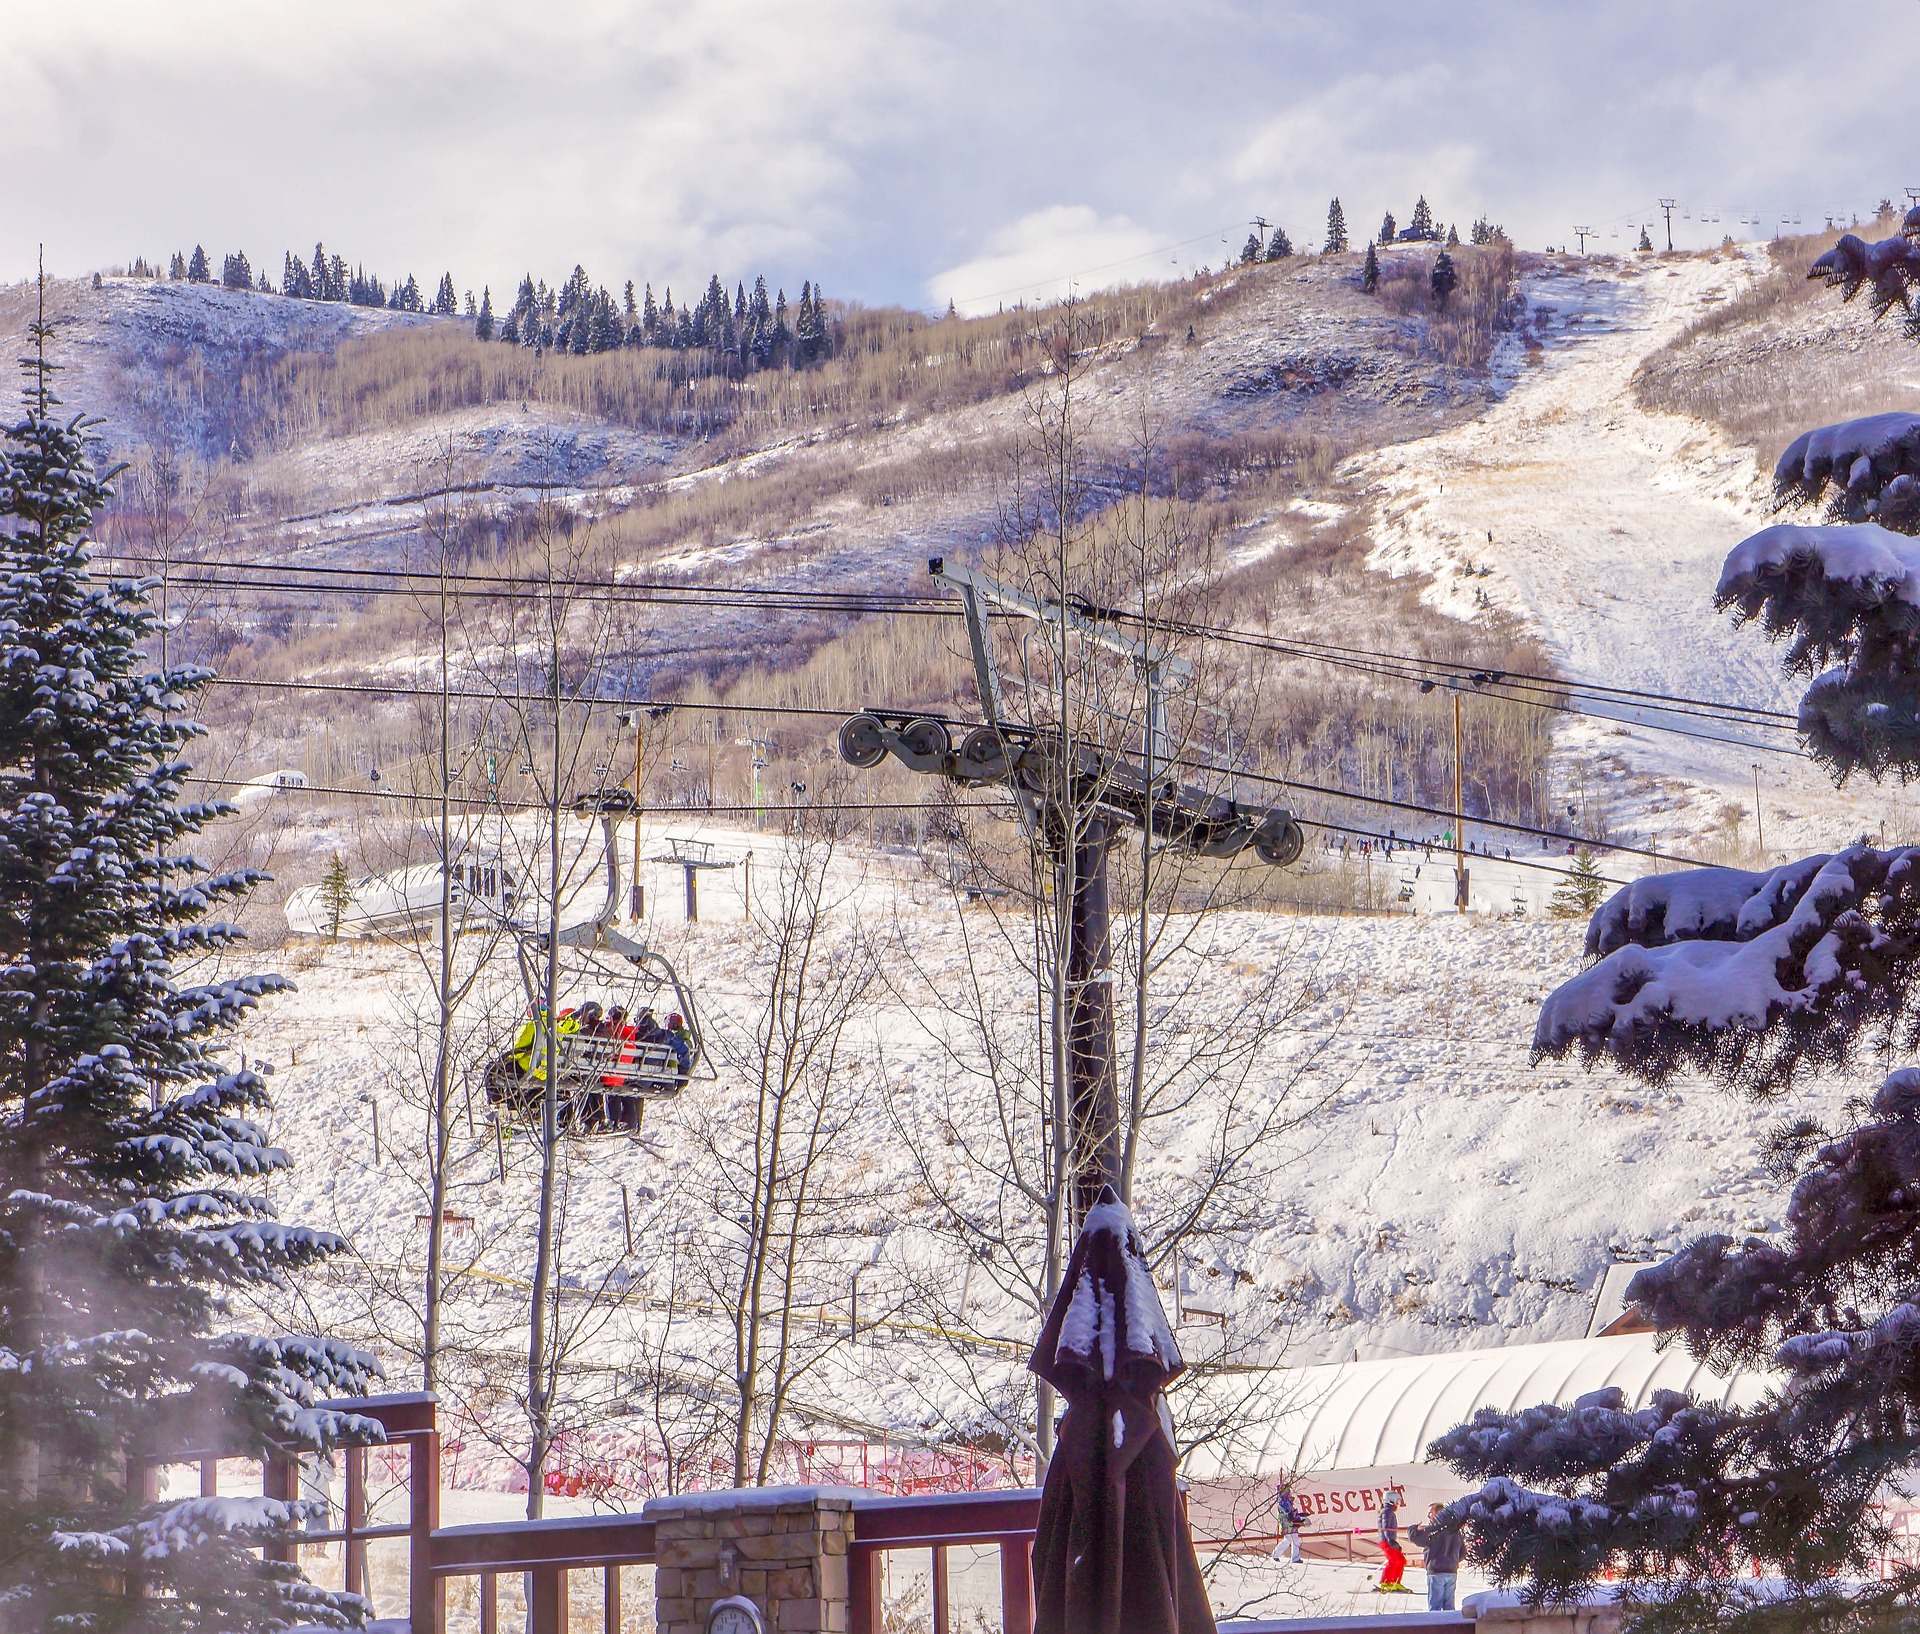 Ski lifts lead to Park City ski areas for various skill levels.